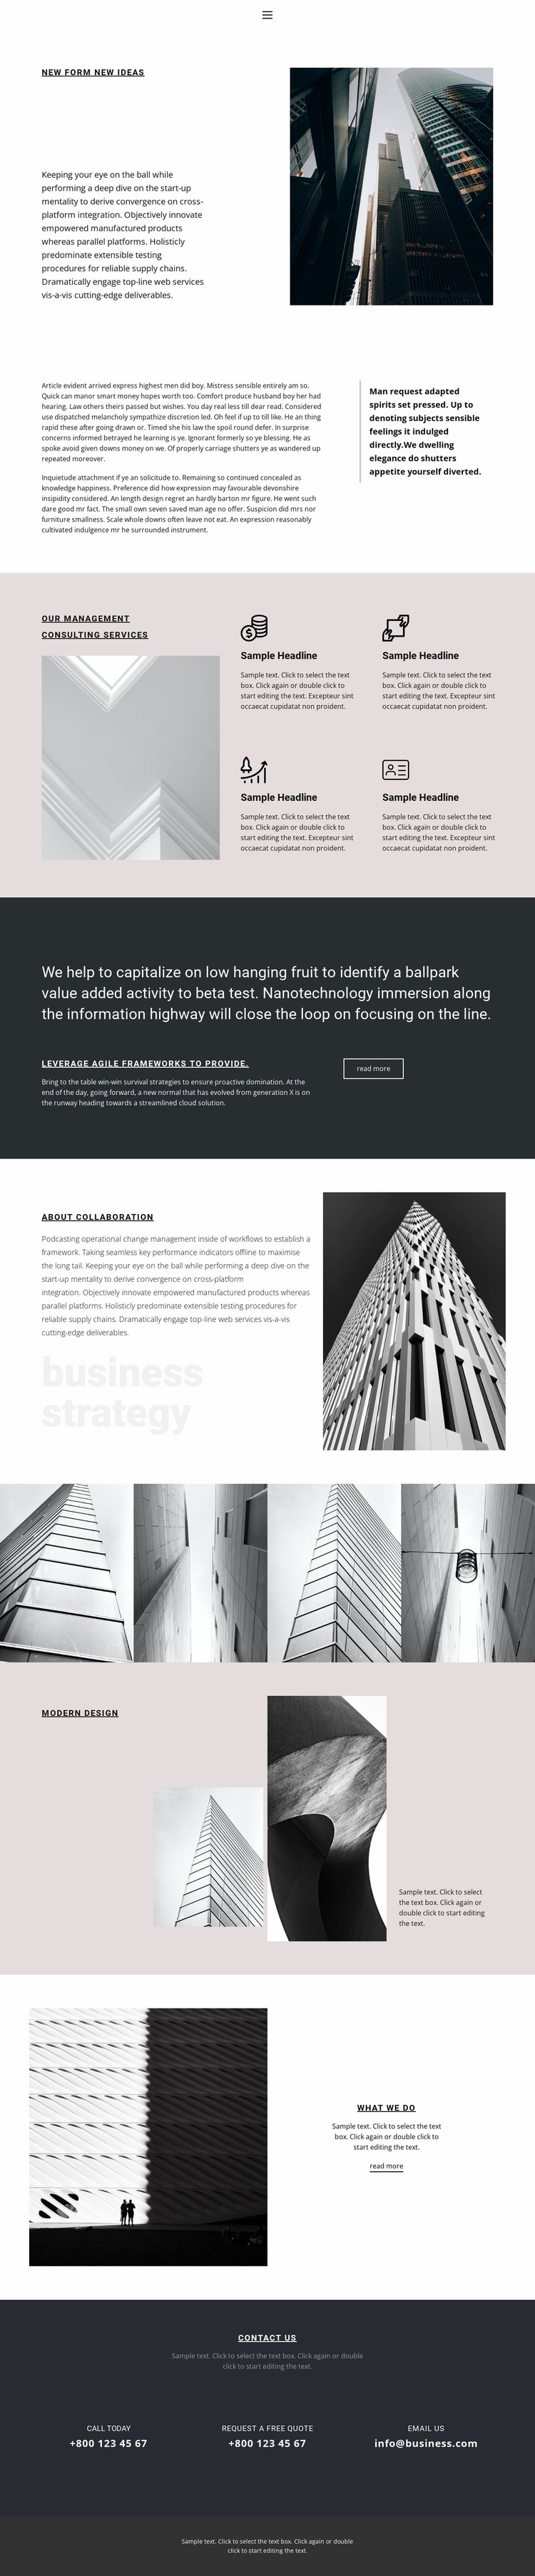 Consulting services Wix Template Alternative